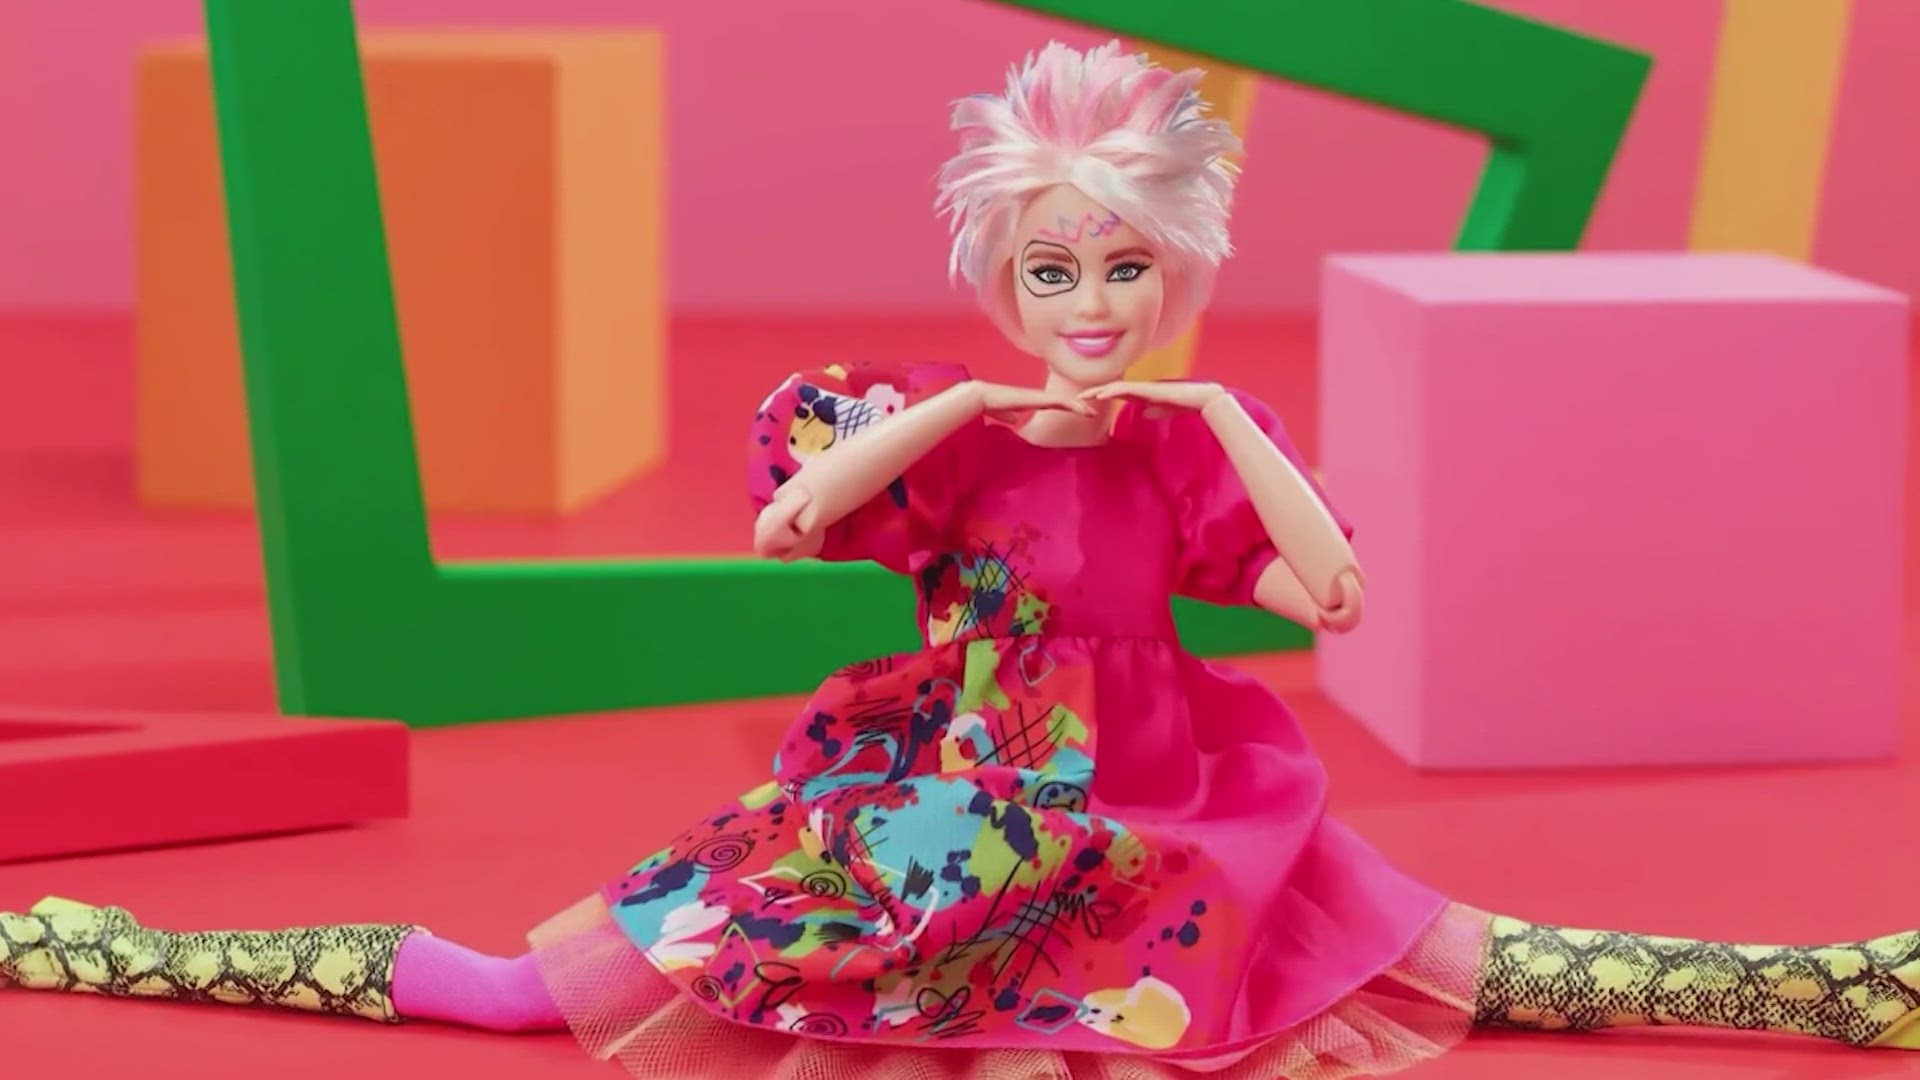 That includes a limited edition "Weird Barbie," featuring hot pink outfit, markings on doll's face and oddly cut and colored hair.